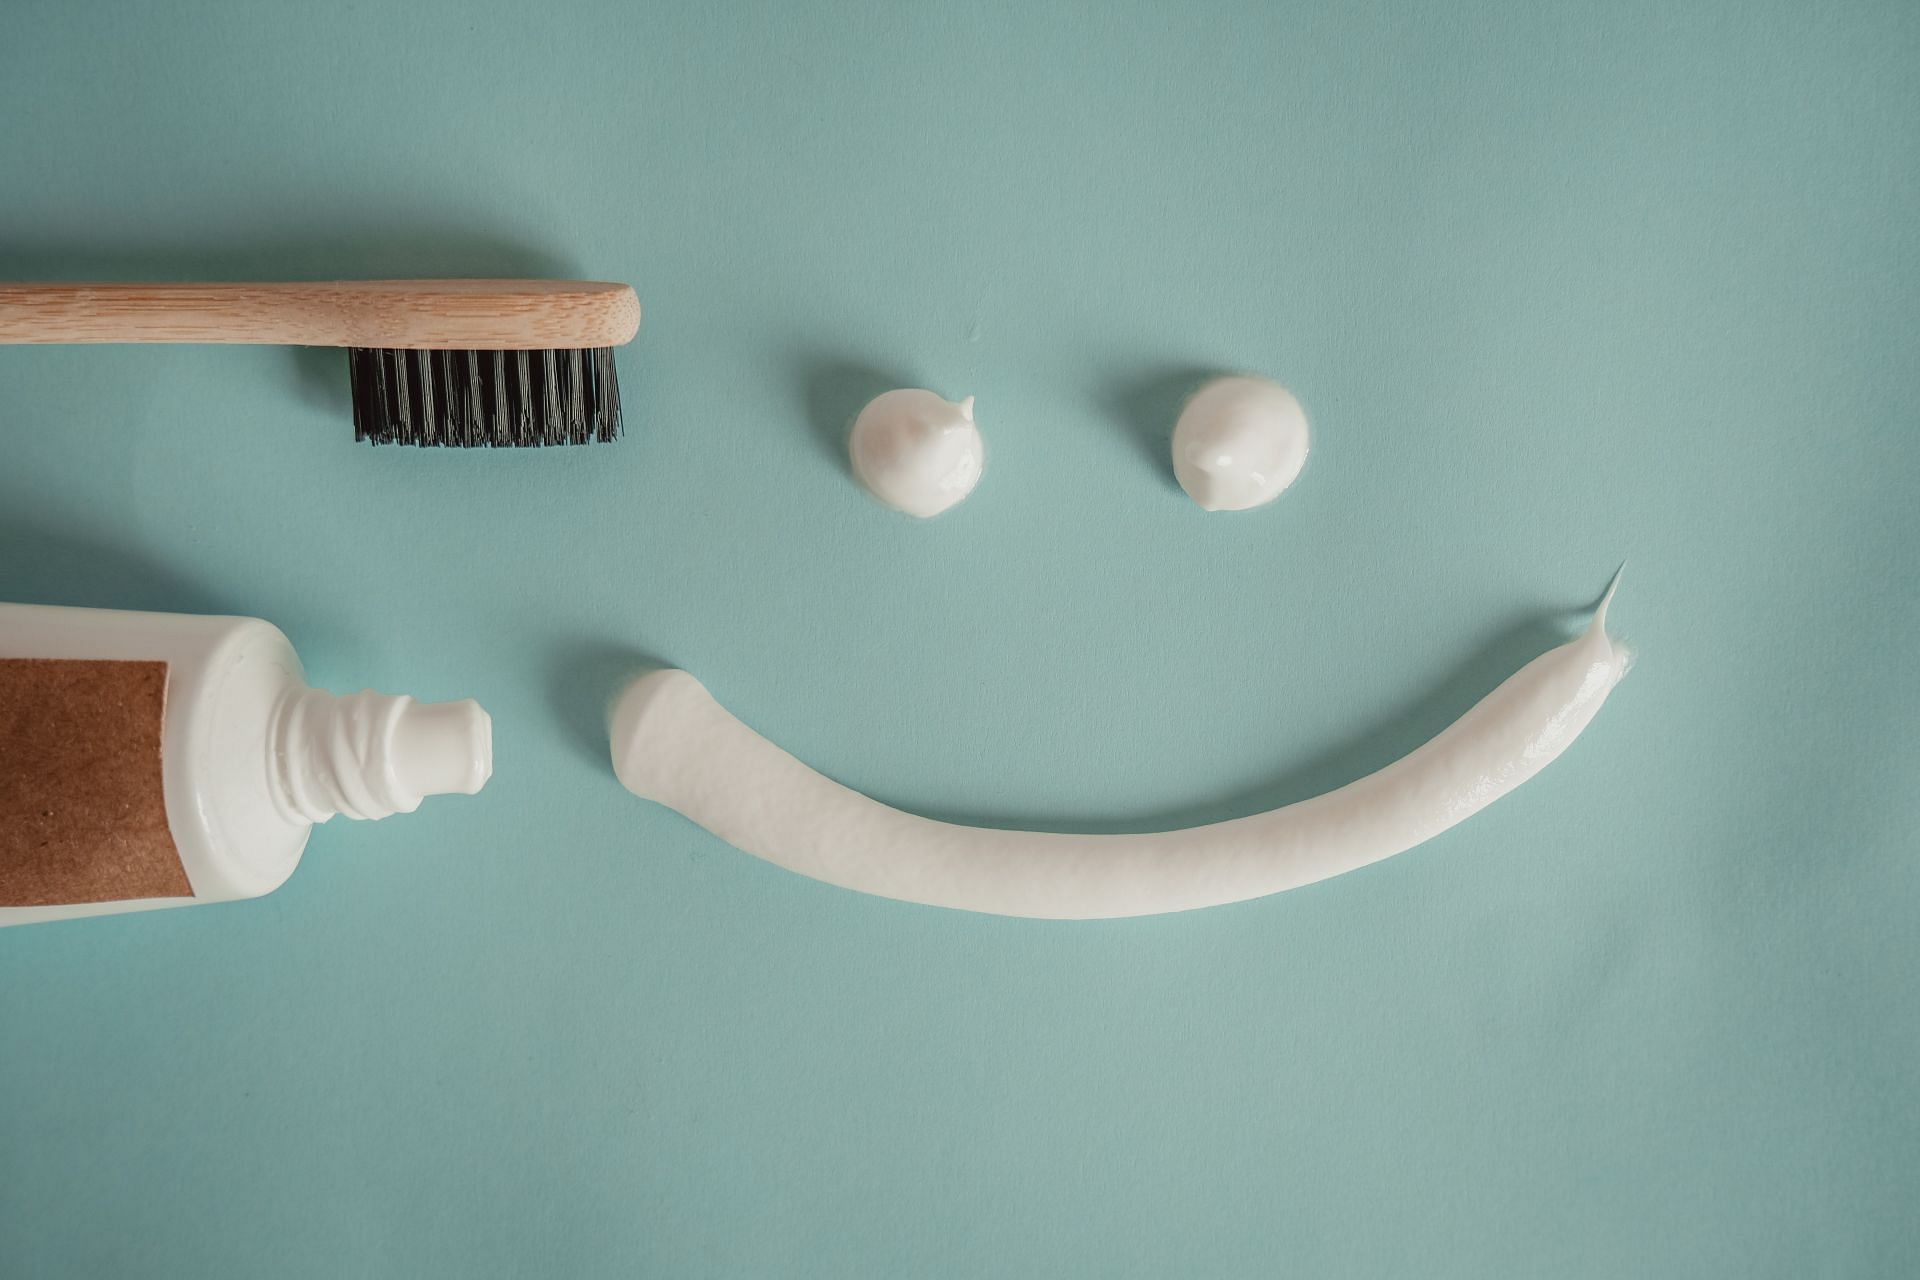 Should you use  hydroxyapatite toothpaste? (Image via pexels / isil)